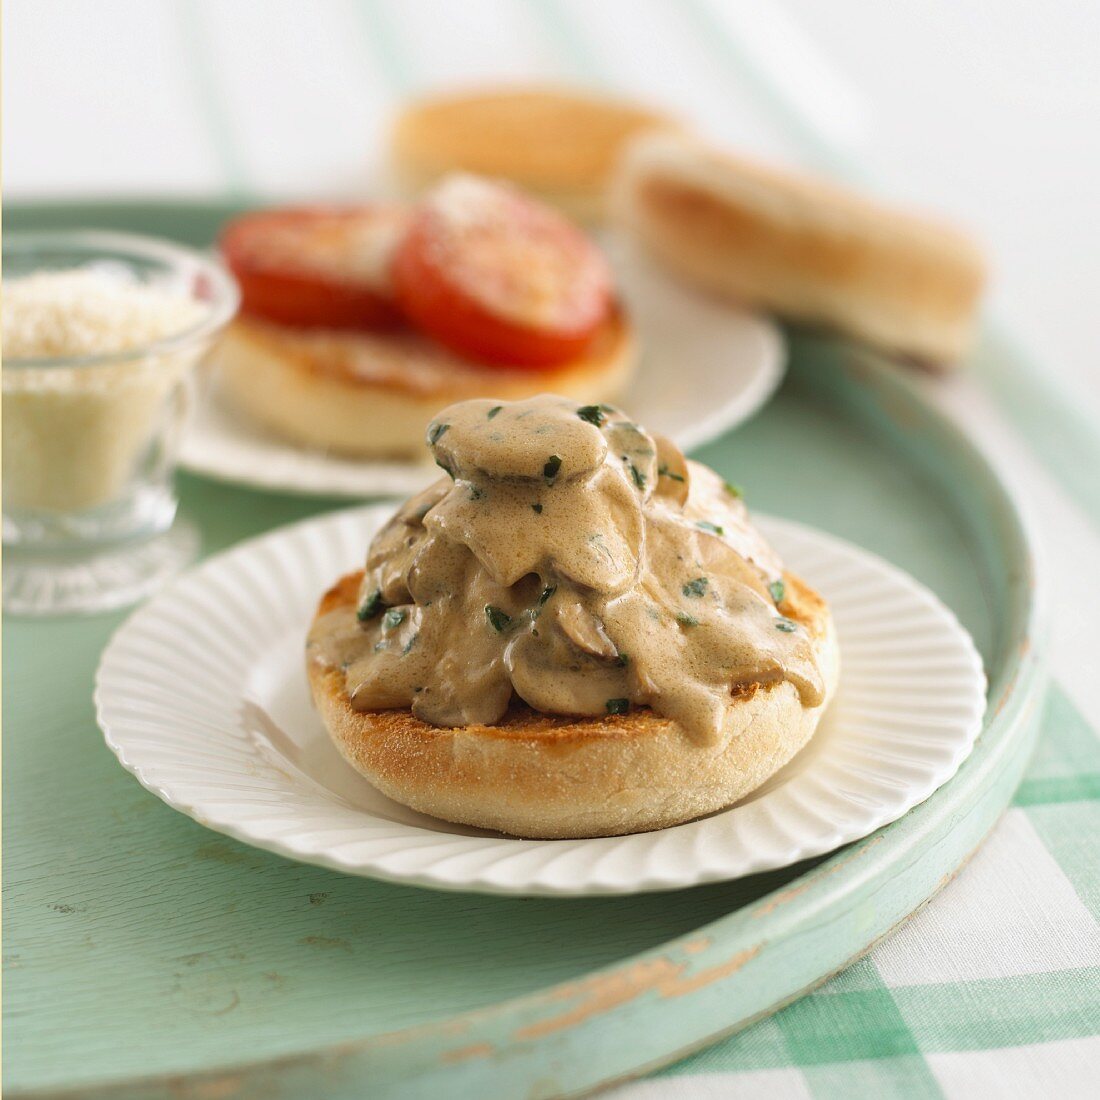 English muffin with mushrooms sauce